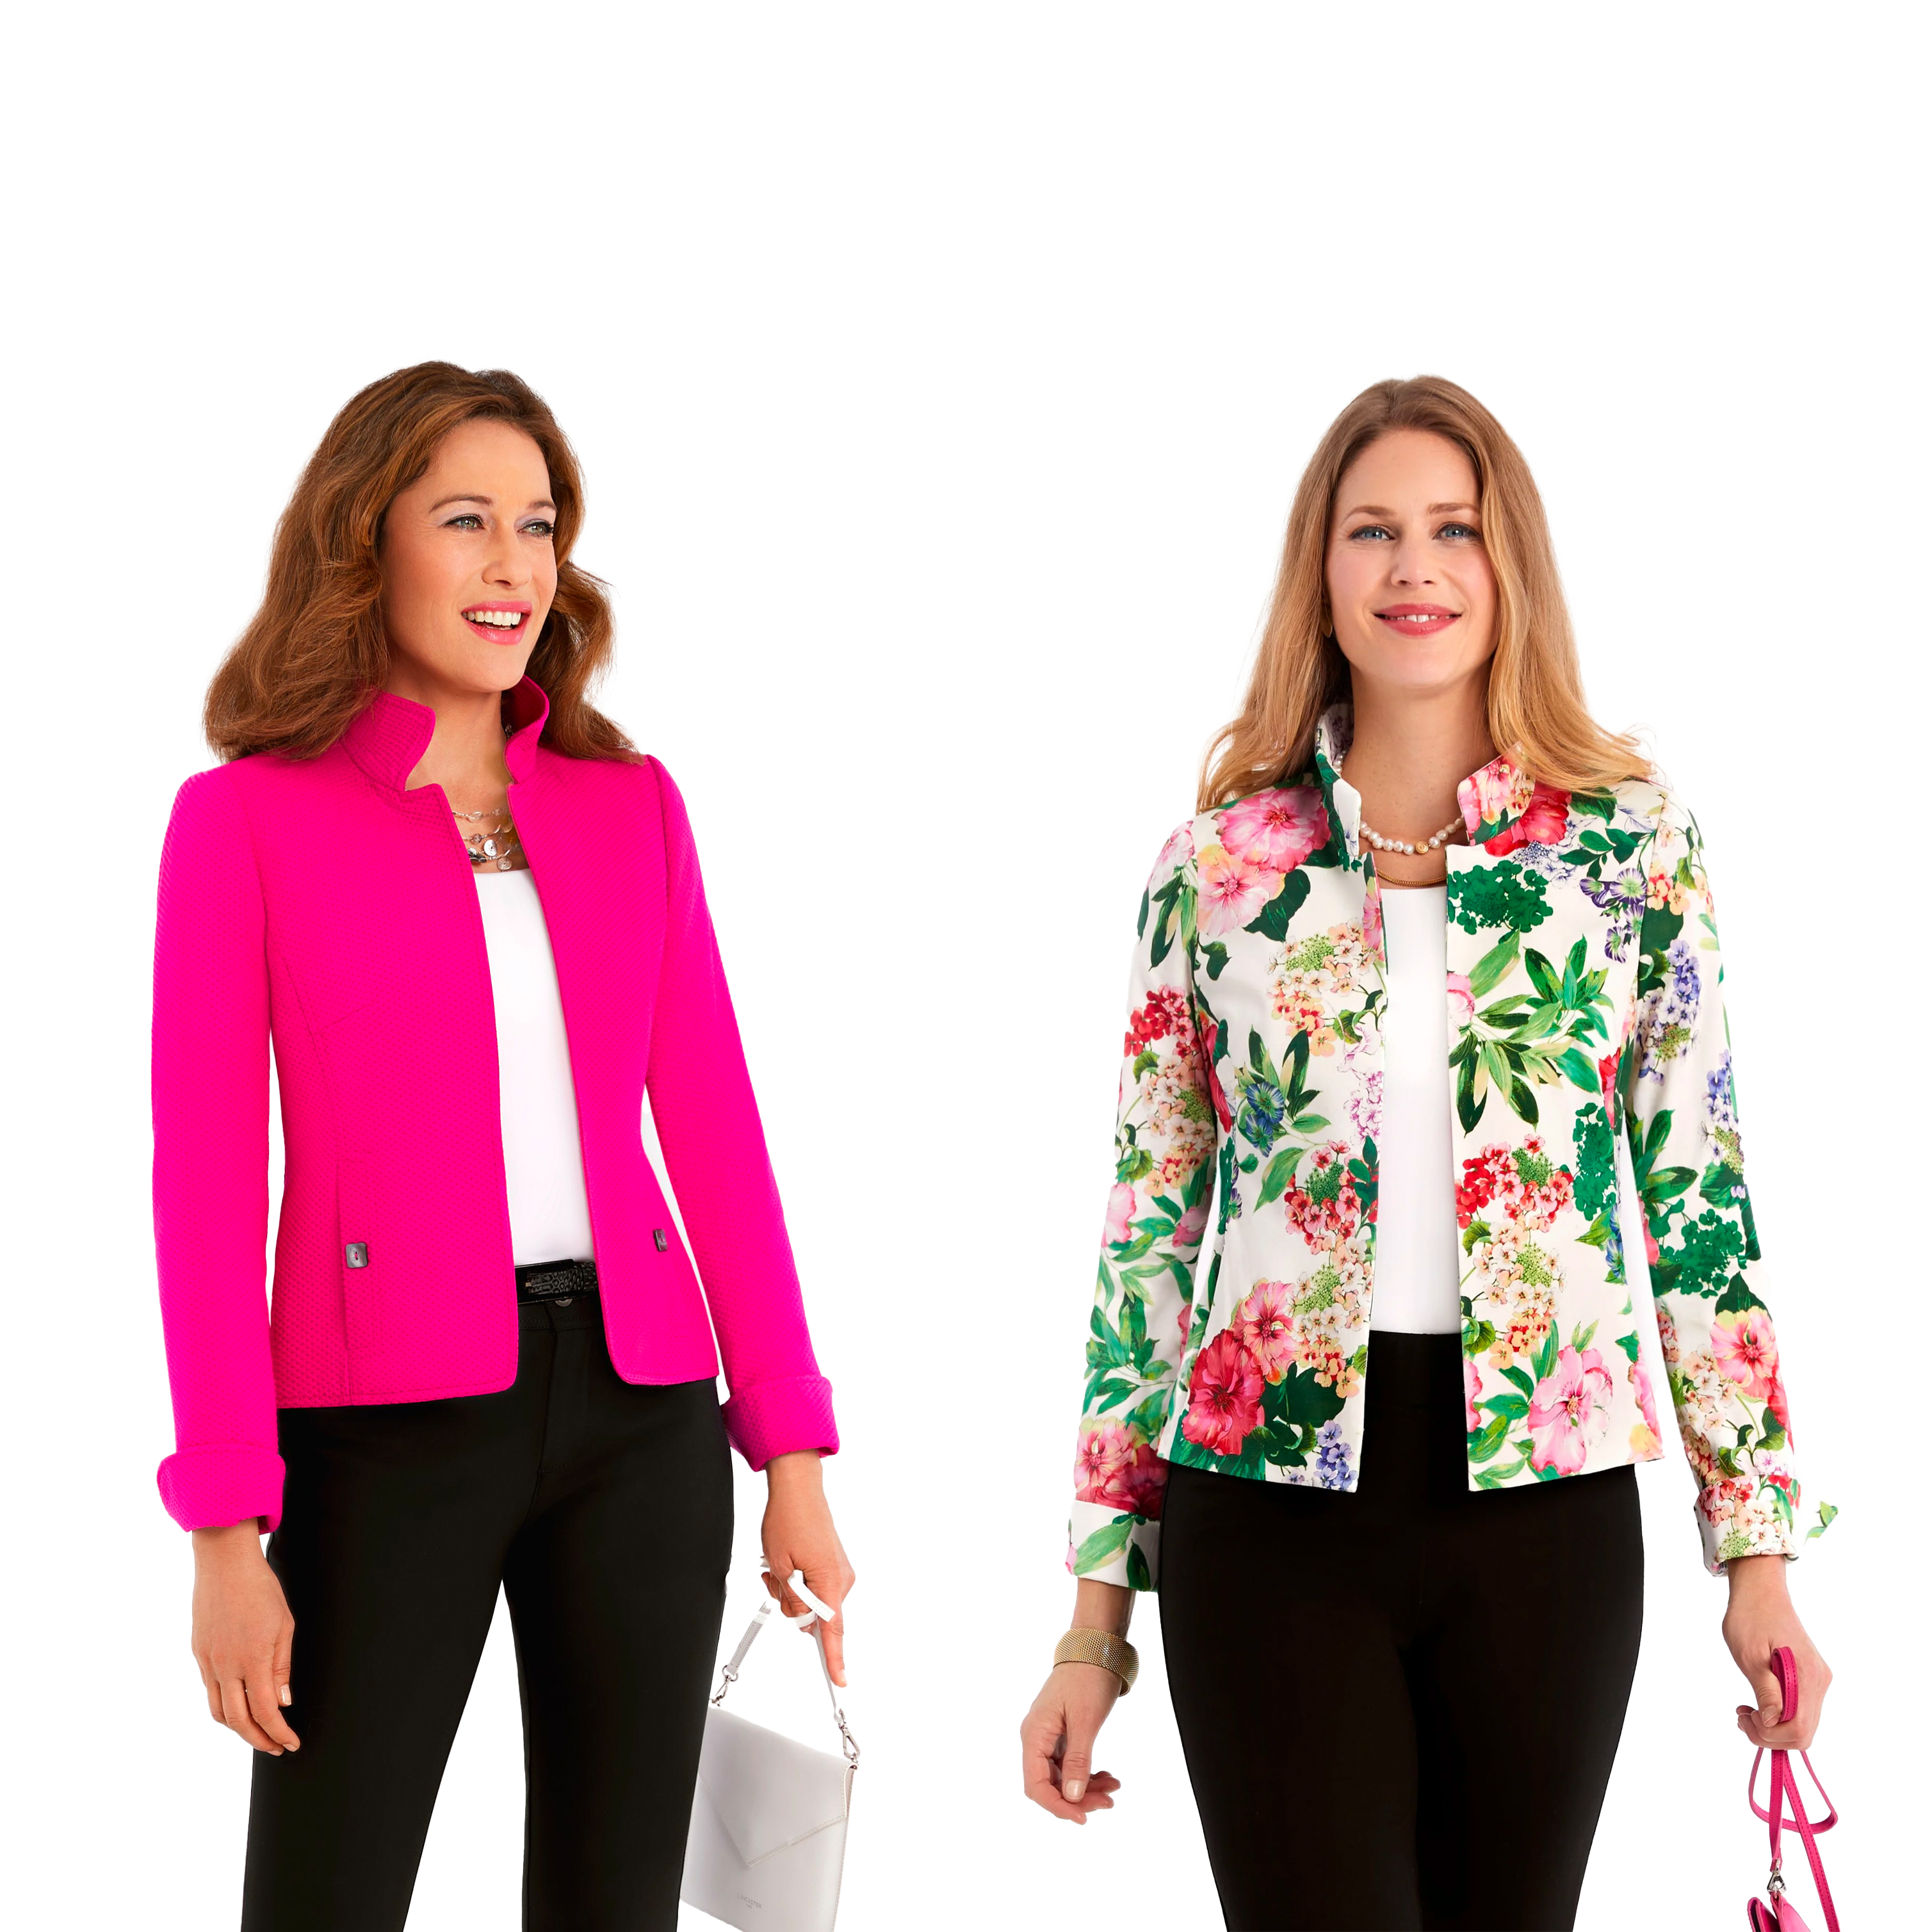 Two women wearing elegant pink and floral jacket